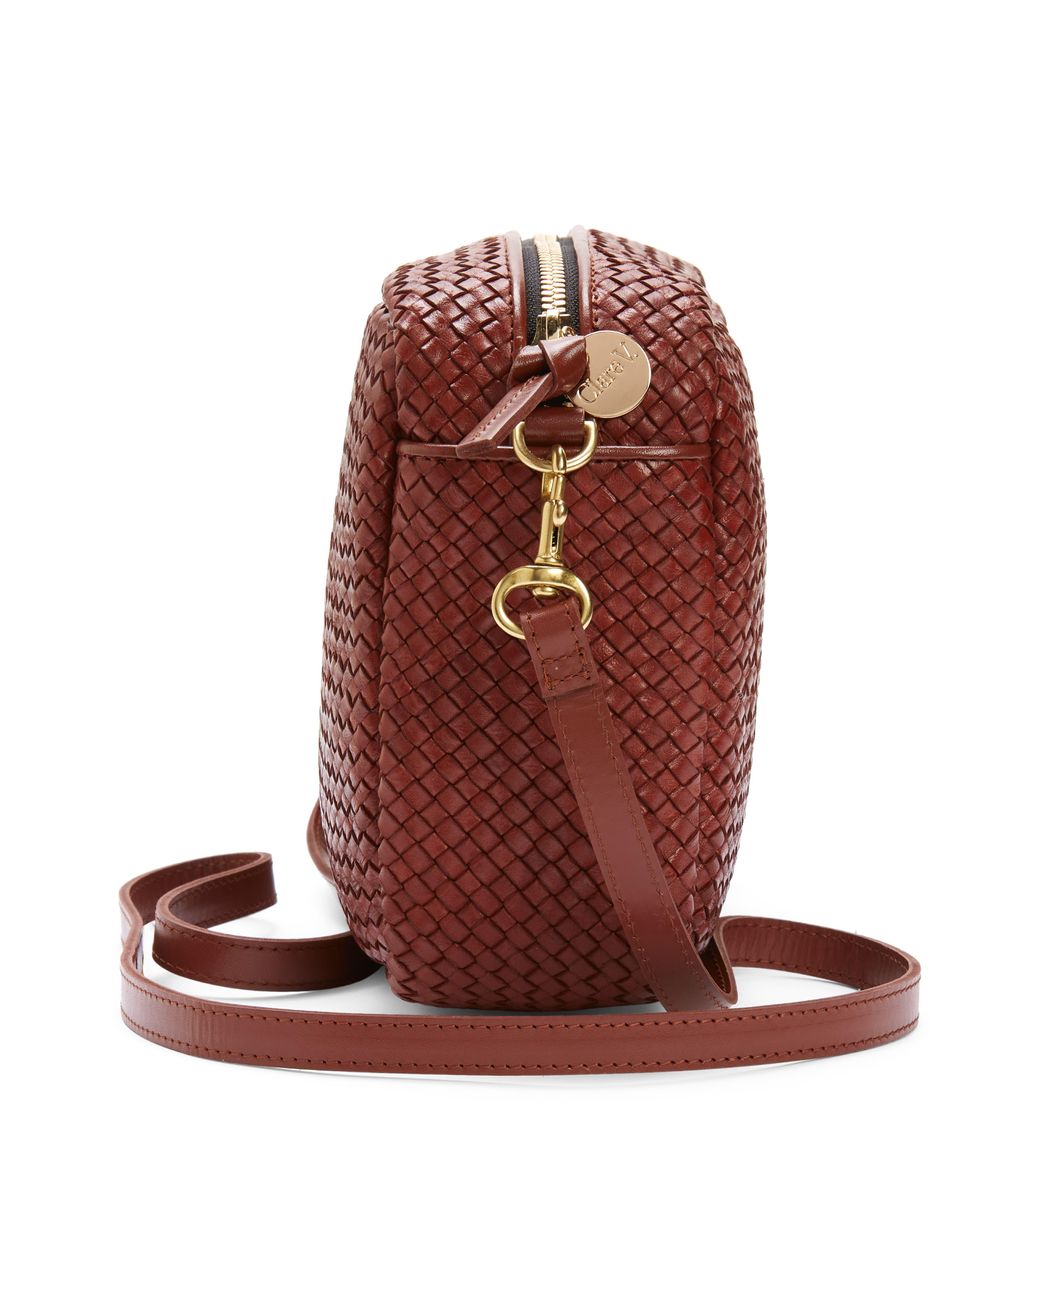 Clare V Marisol Woven Leather Crossbody Bag In Assorted